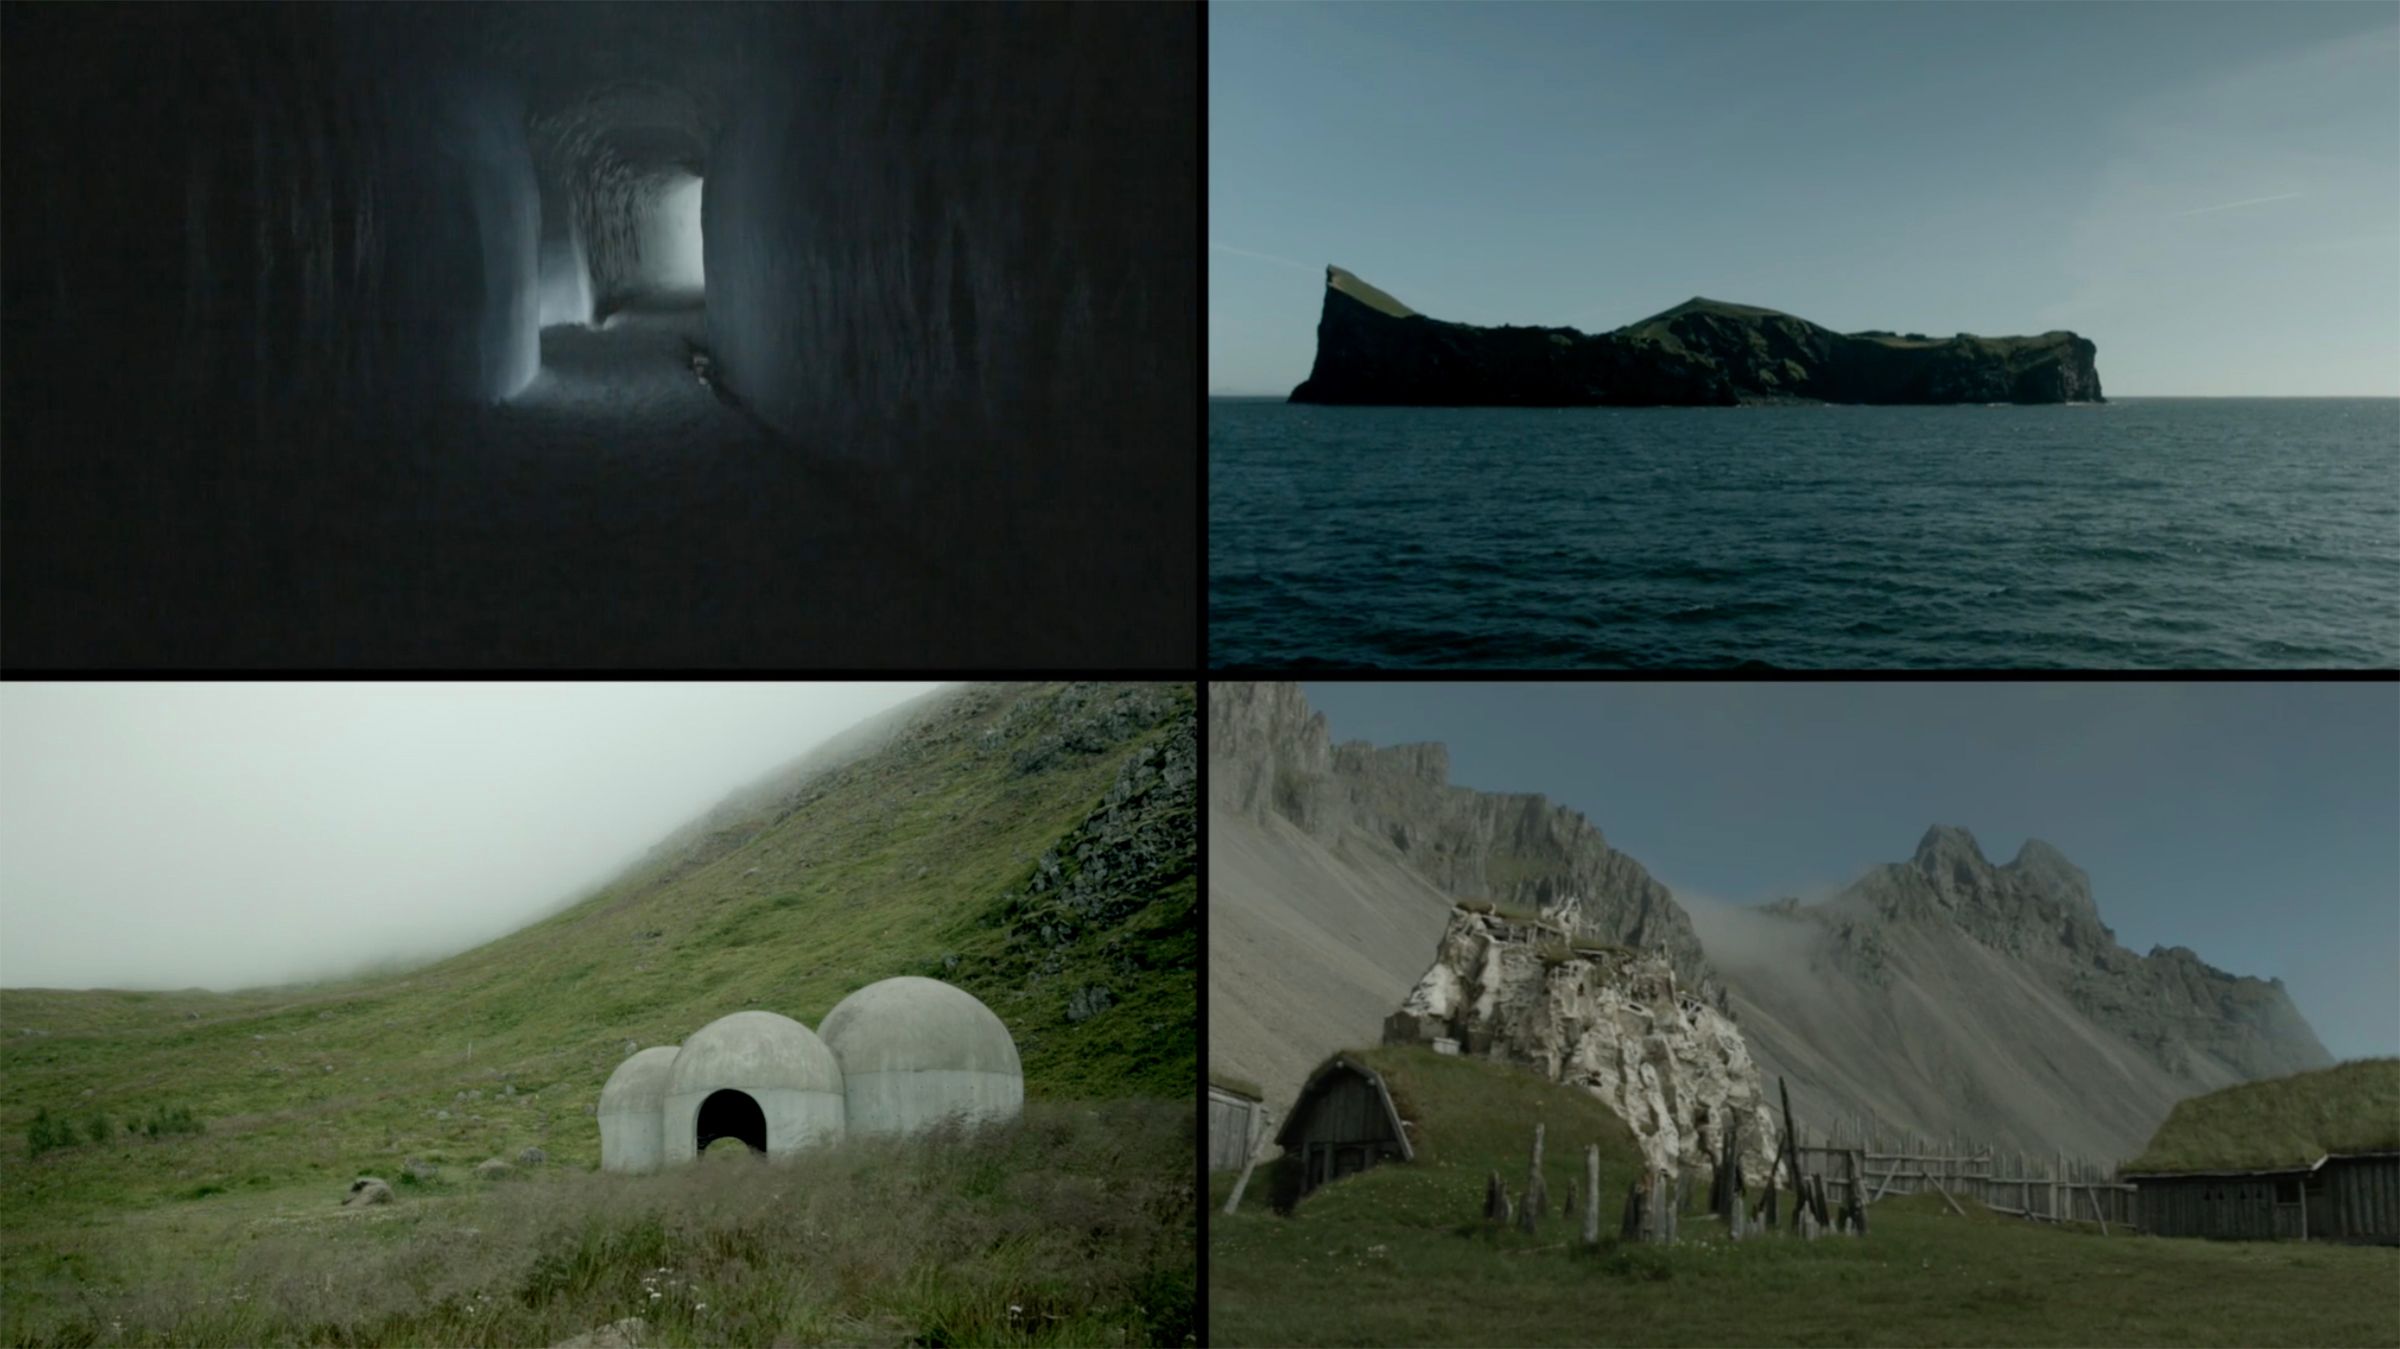 Four quadrants with a natural scene in each square (a shadowy cave, an island, a grassy hill with a domed building, a craggy cliff with a grass-covered house)